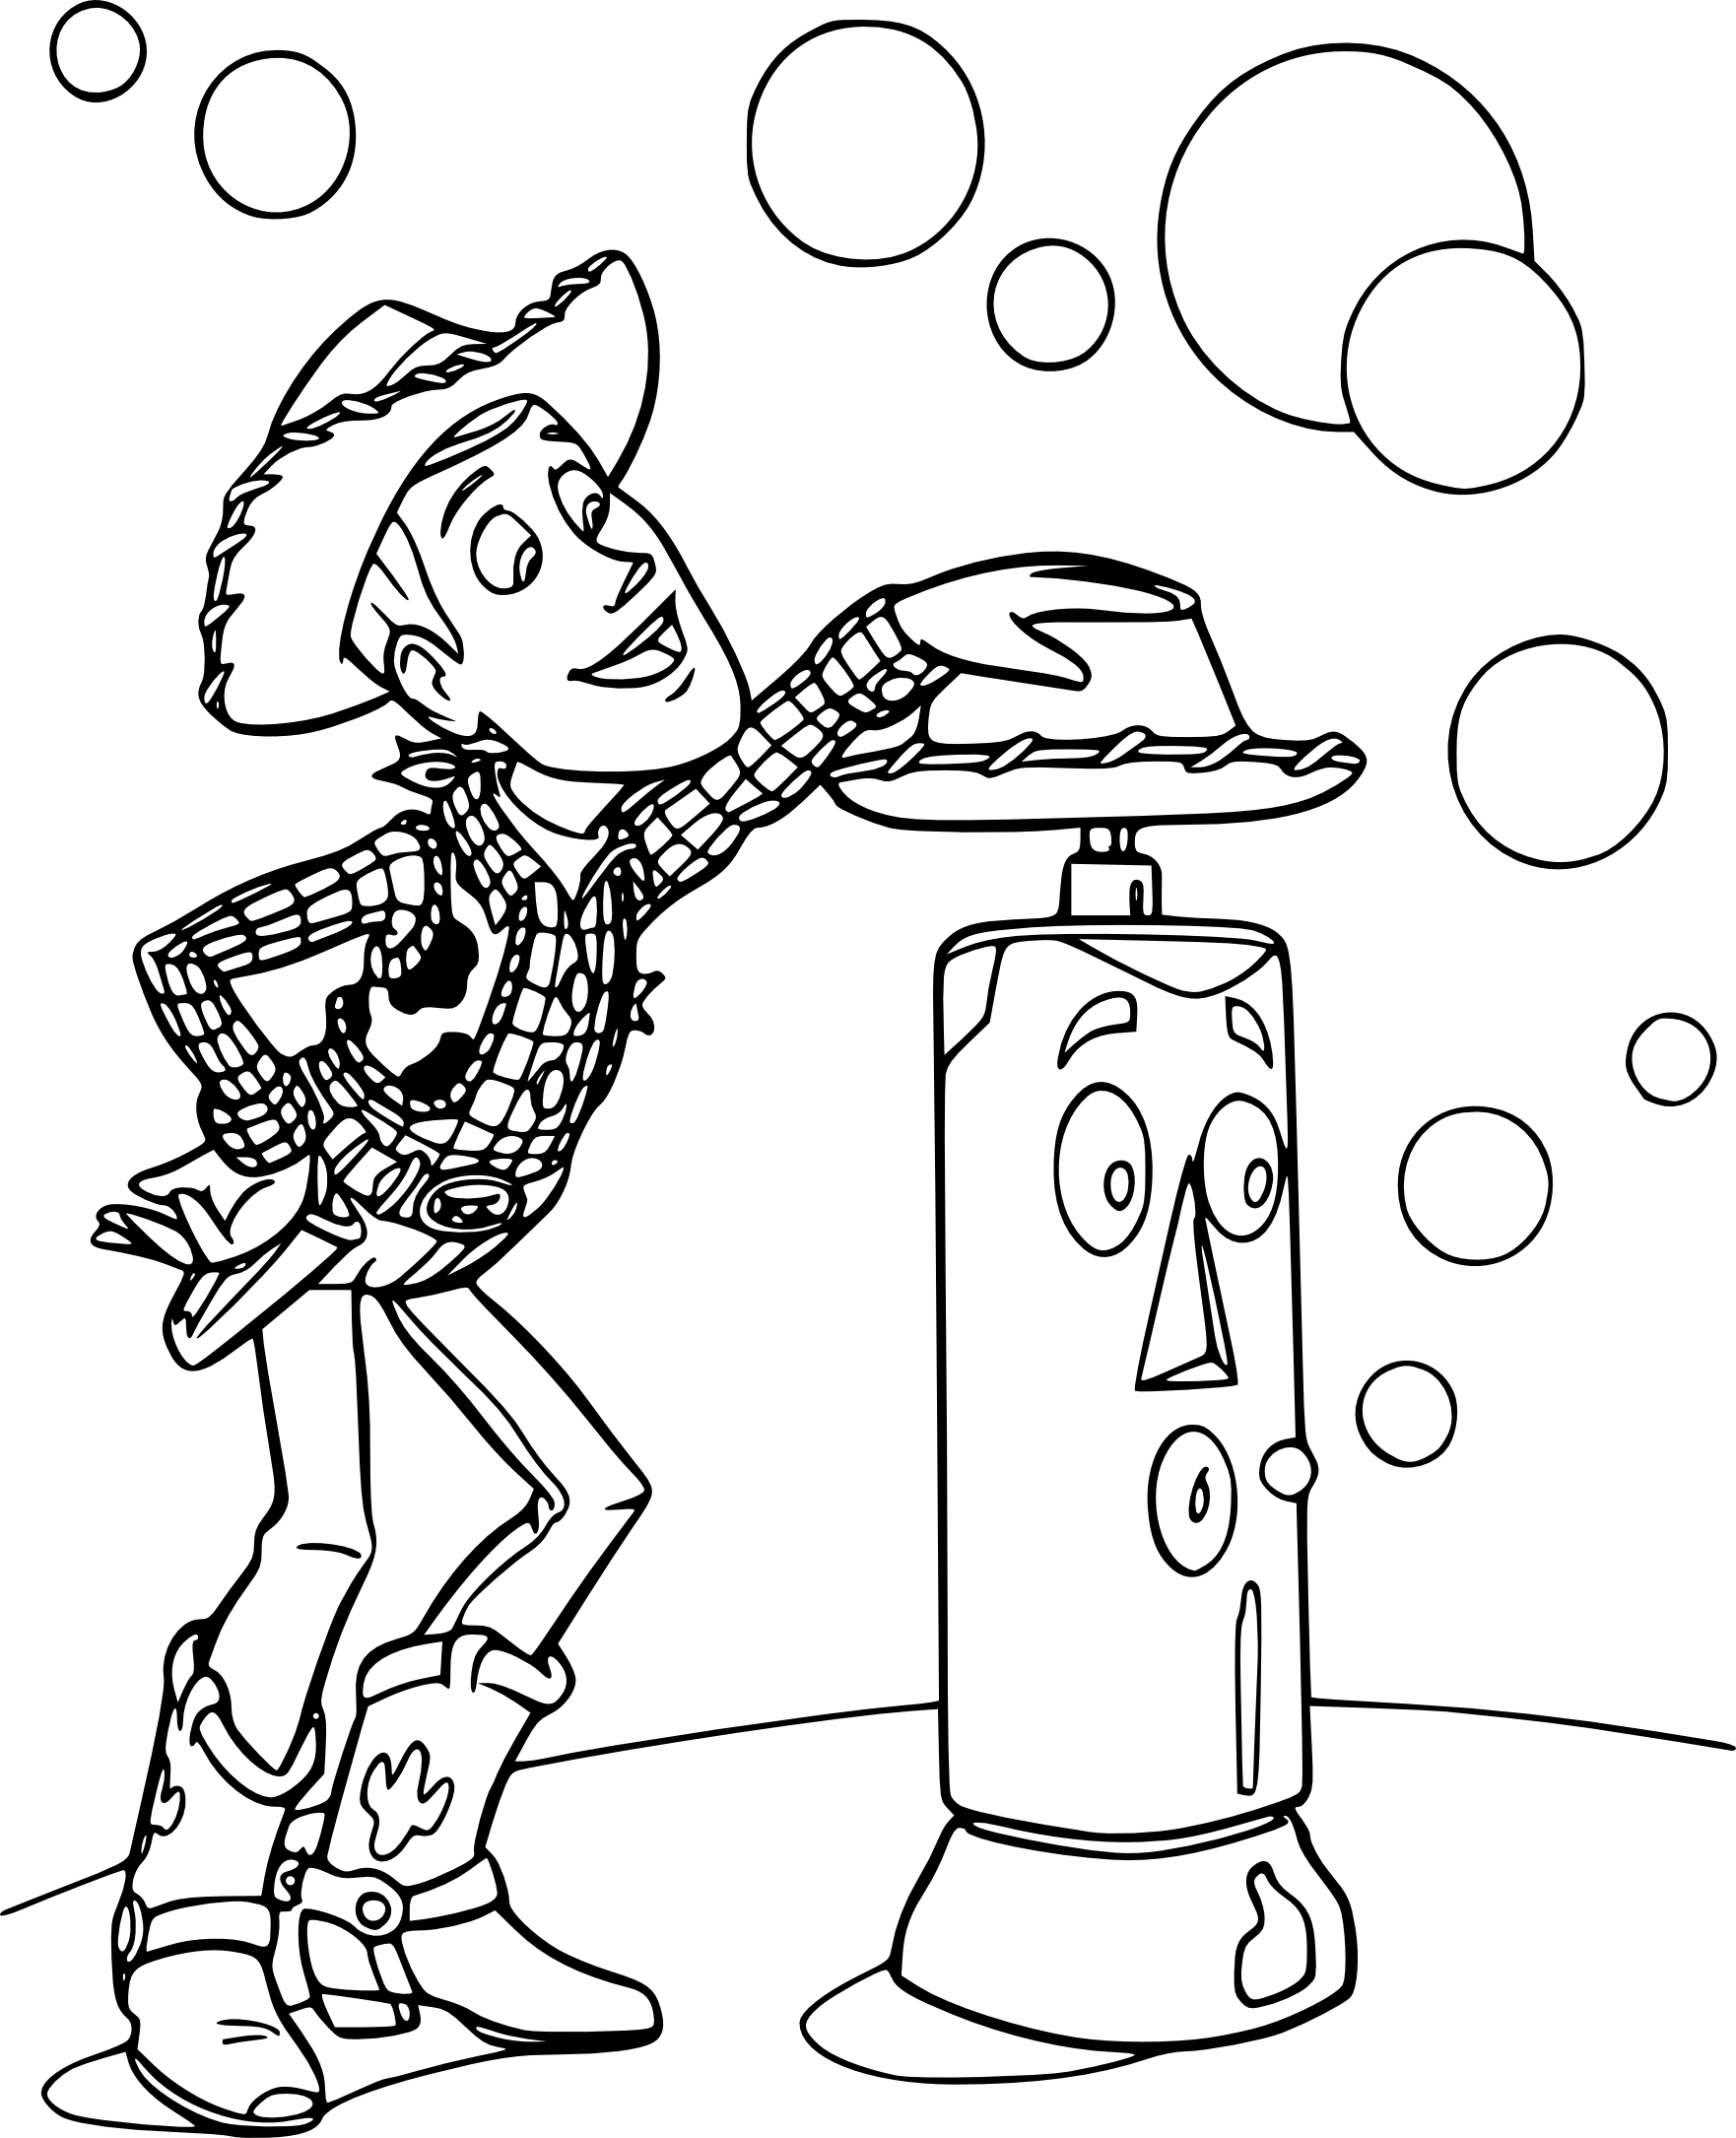 Woody Toy Story 3 coloring page